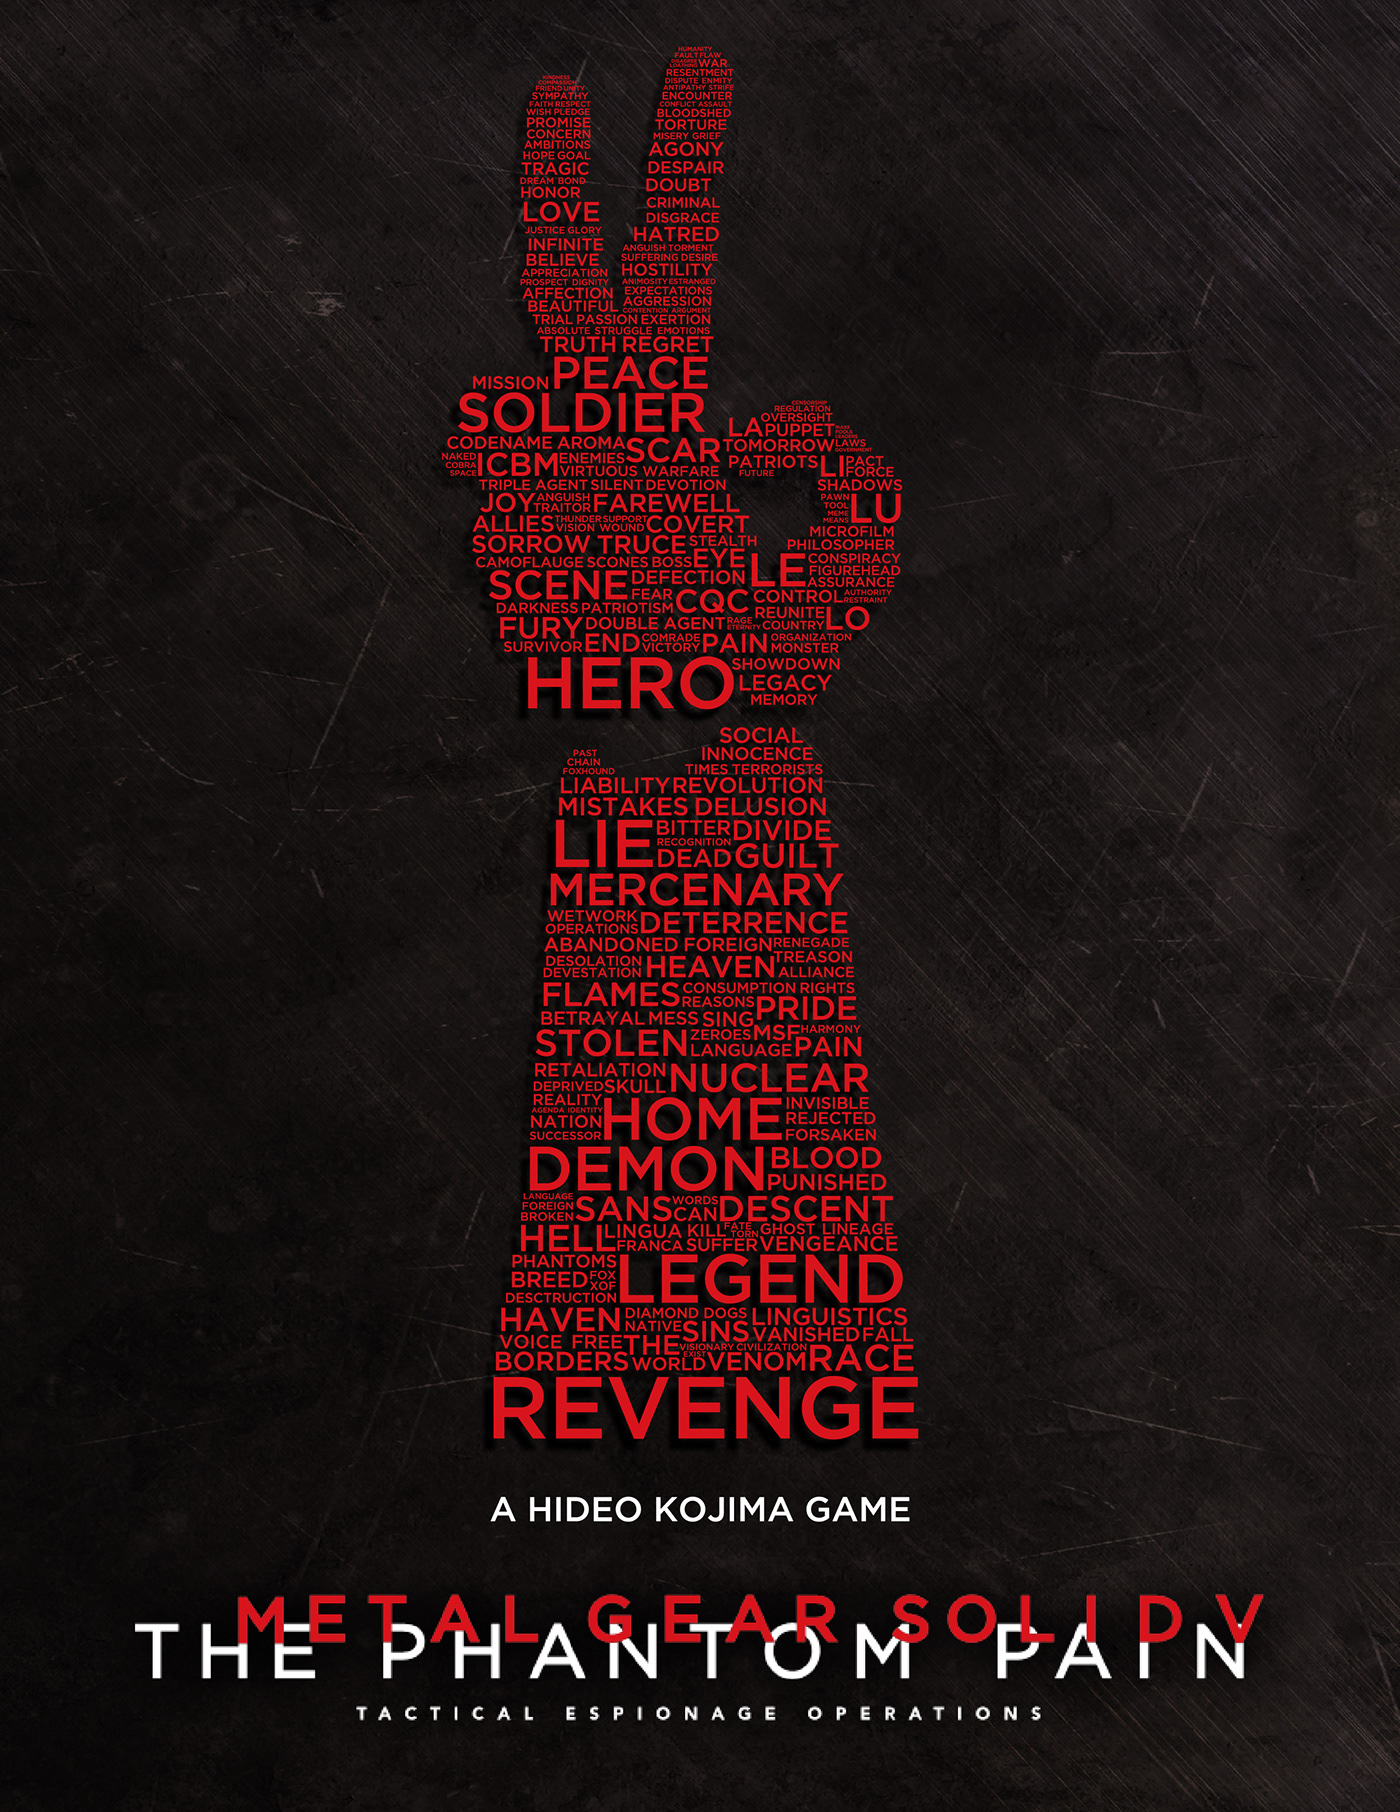 A poster celebrating the global release of Metal Gear Solid V - The Phantom Pain.